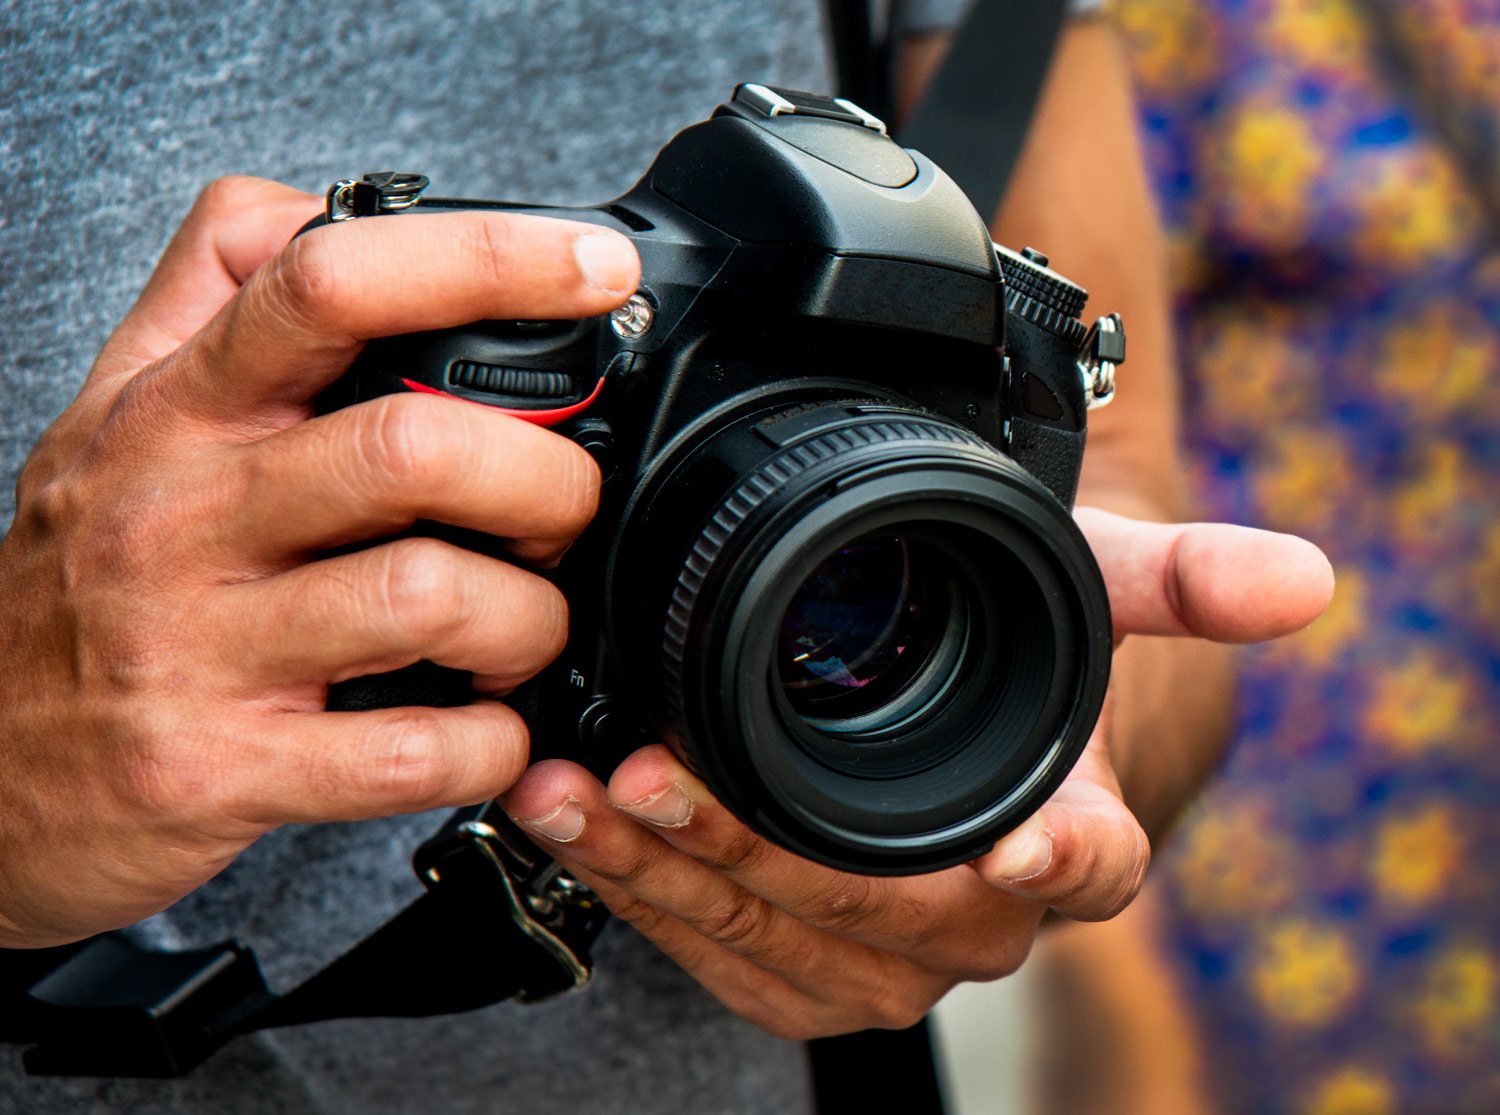 close up of a person holding a DSLR camera for photography terms camera, hand held